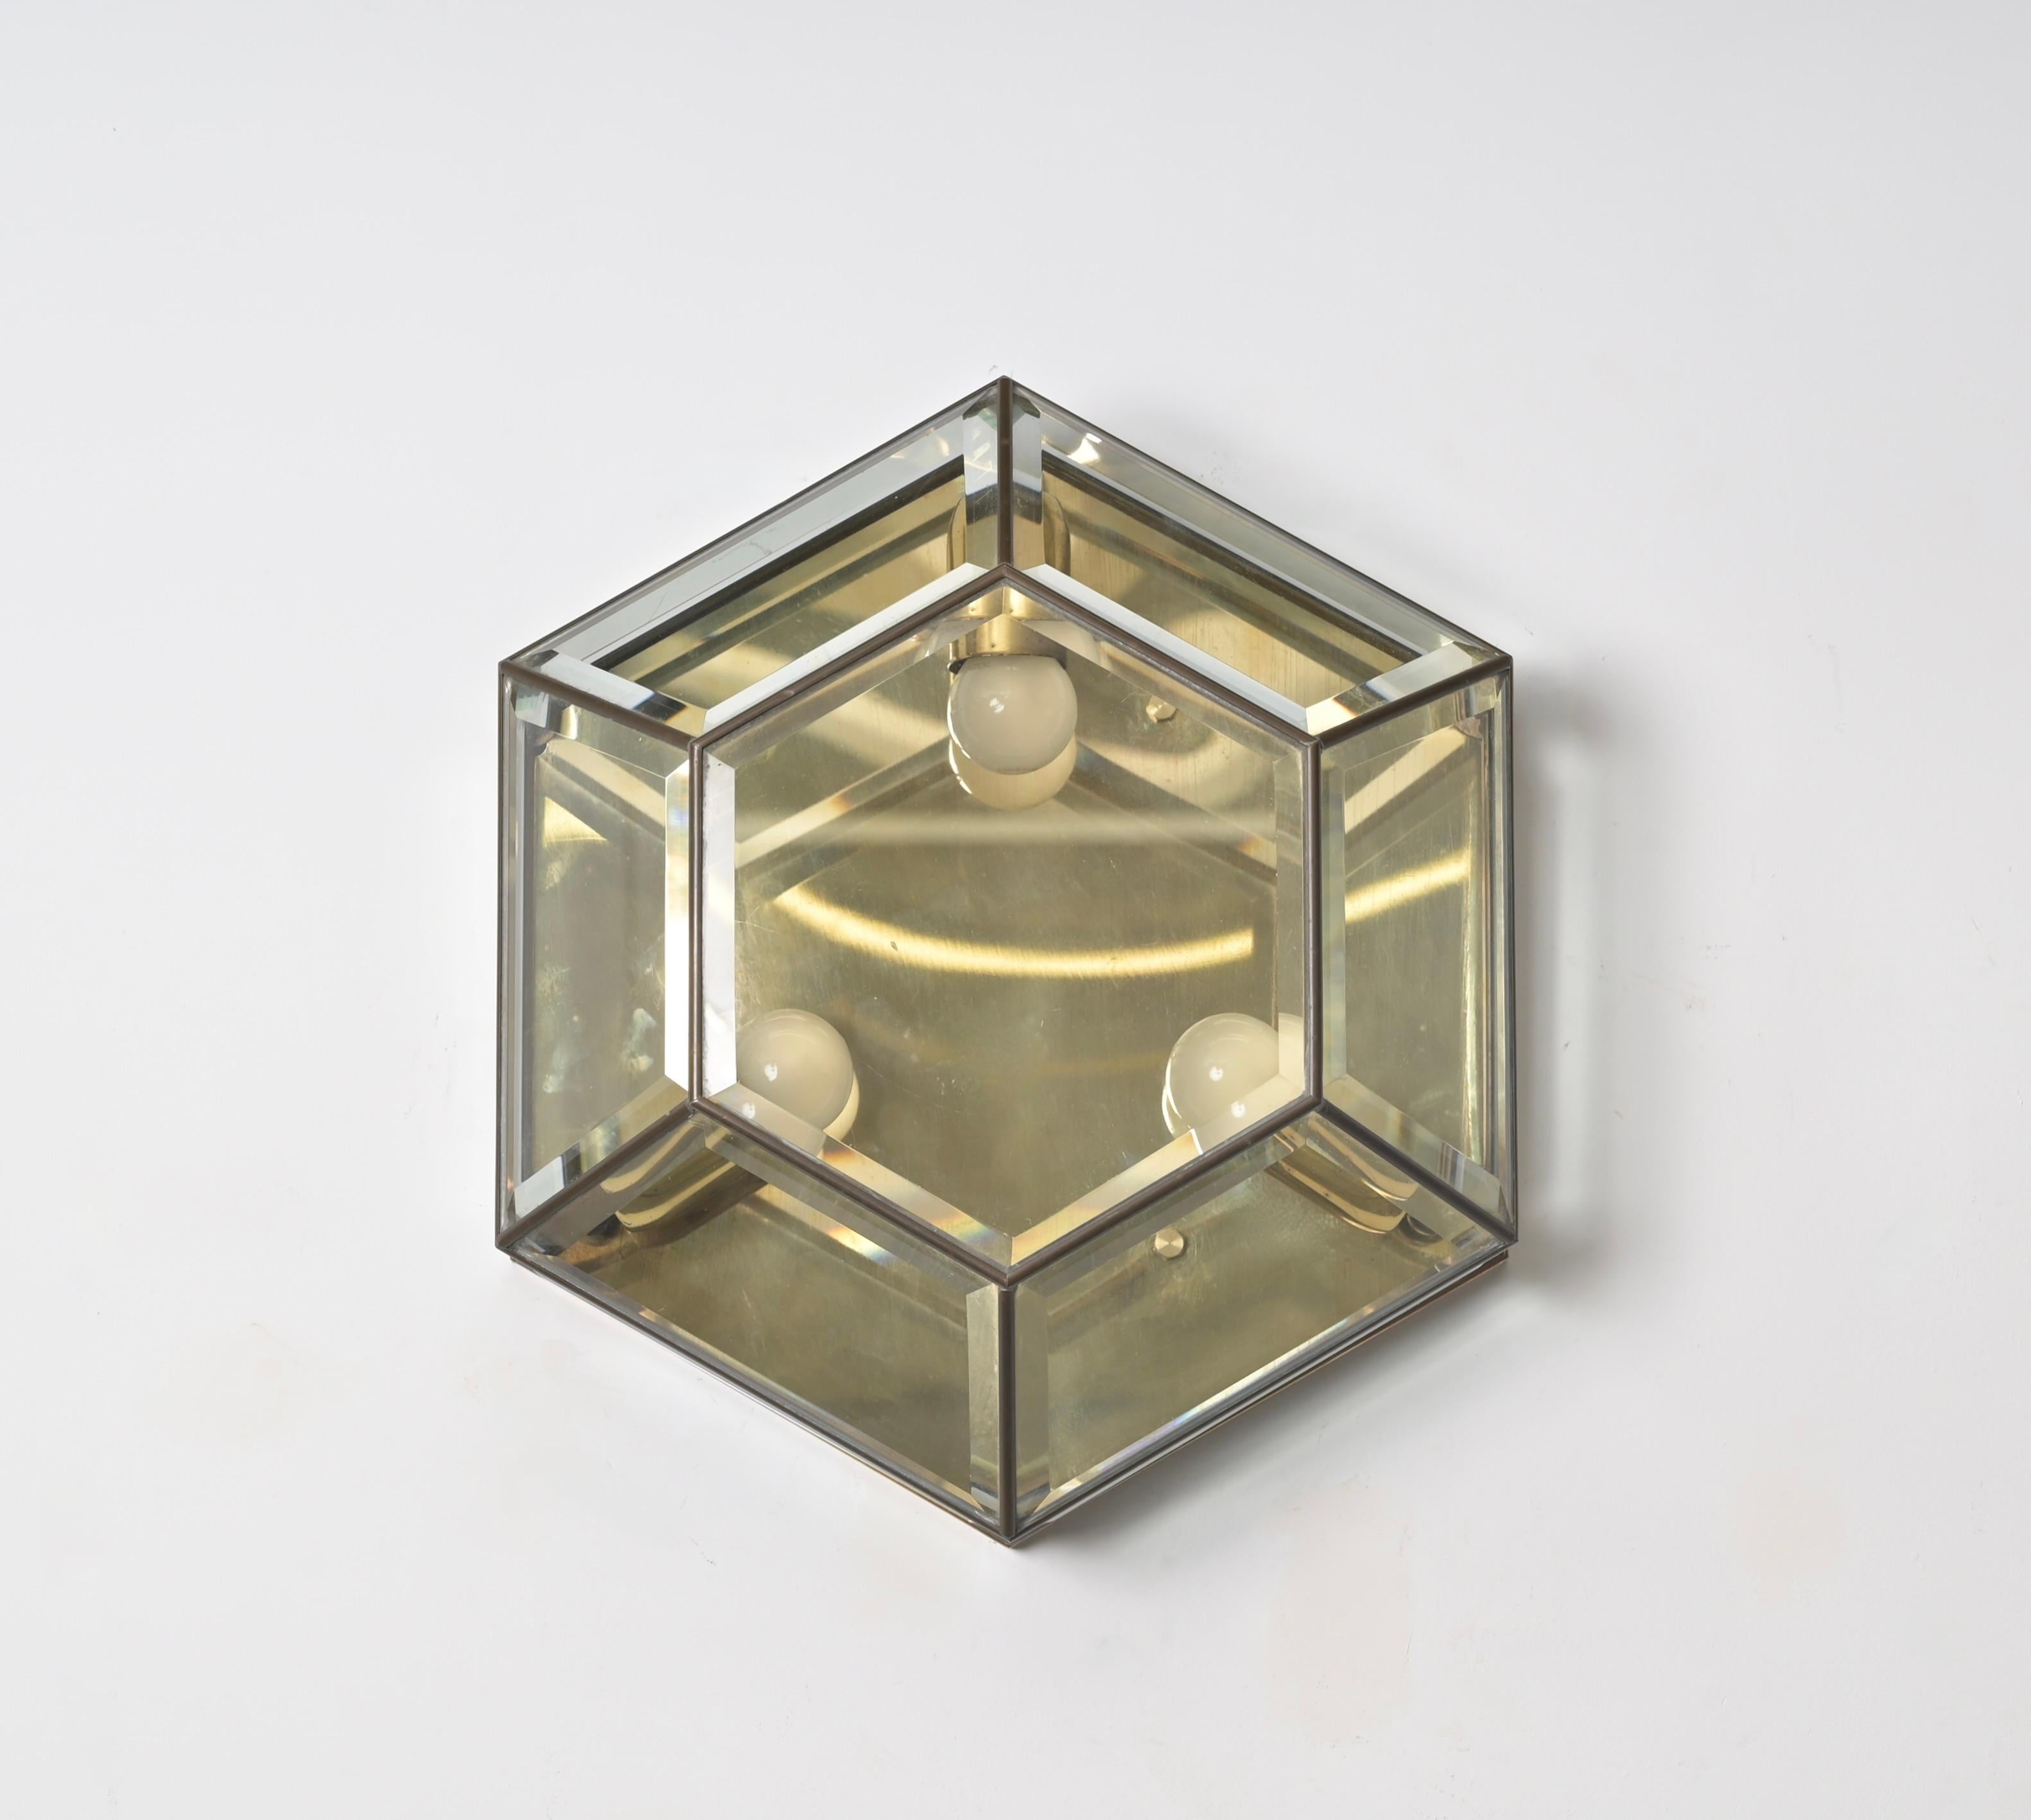 Magnificent wall or ceiling lamp made in bevelled glass and solid brass. This amazing and rare piece was made in Italy during the 1950s and is attributed to Fontana Arte. 

This versatile lamp features an hexagonal shaped structure in solid brass